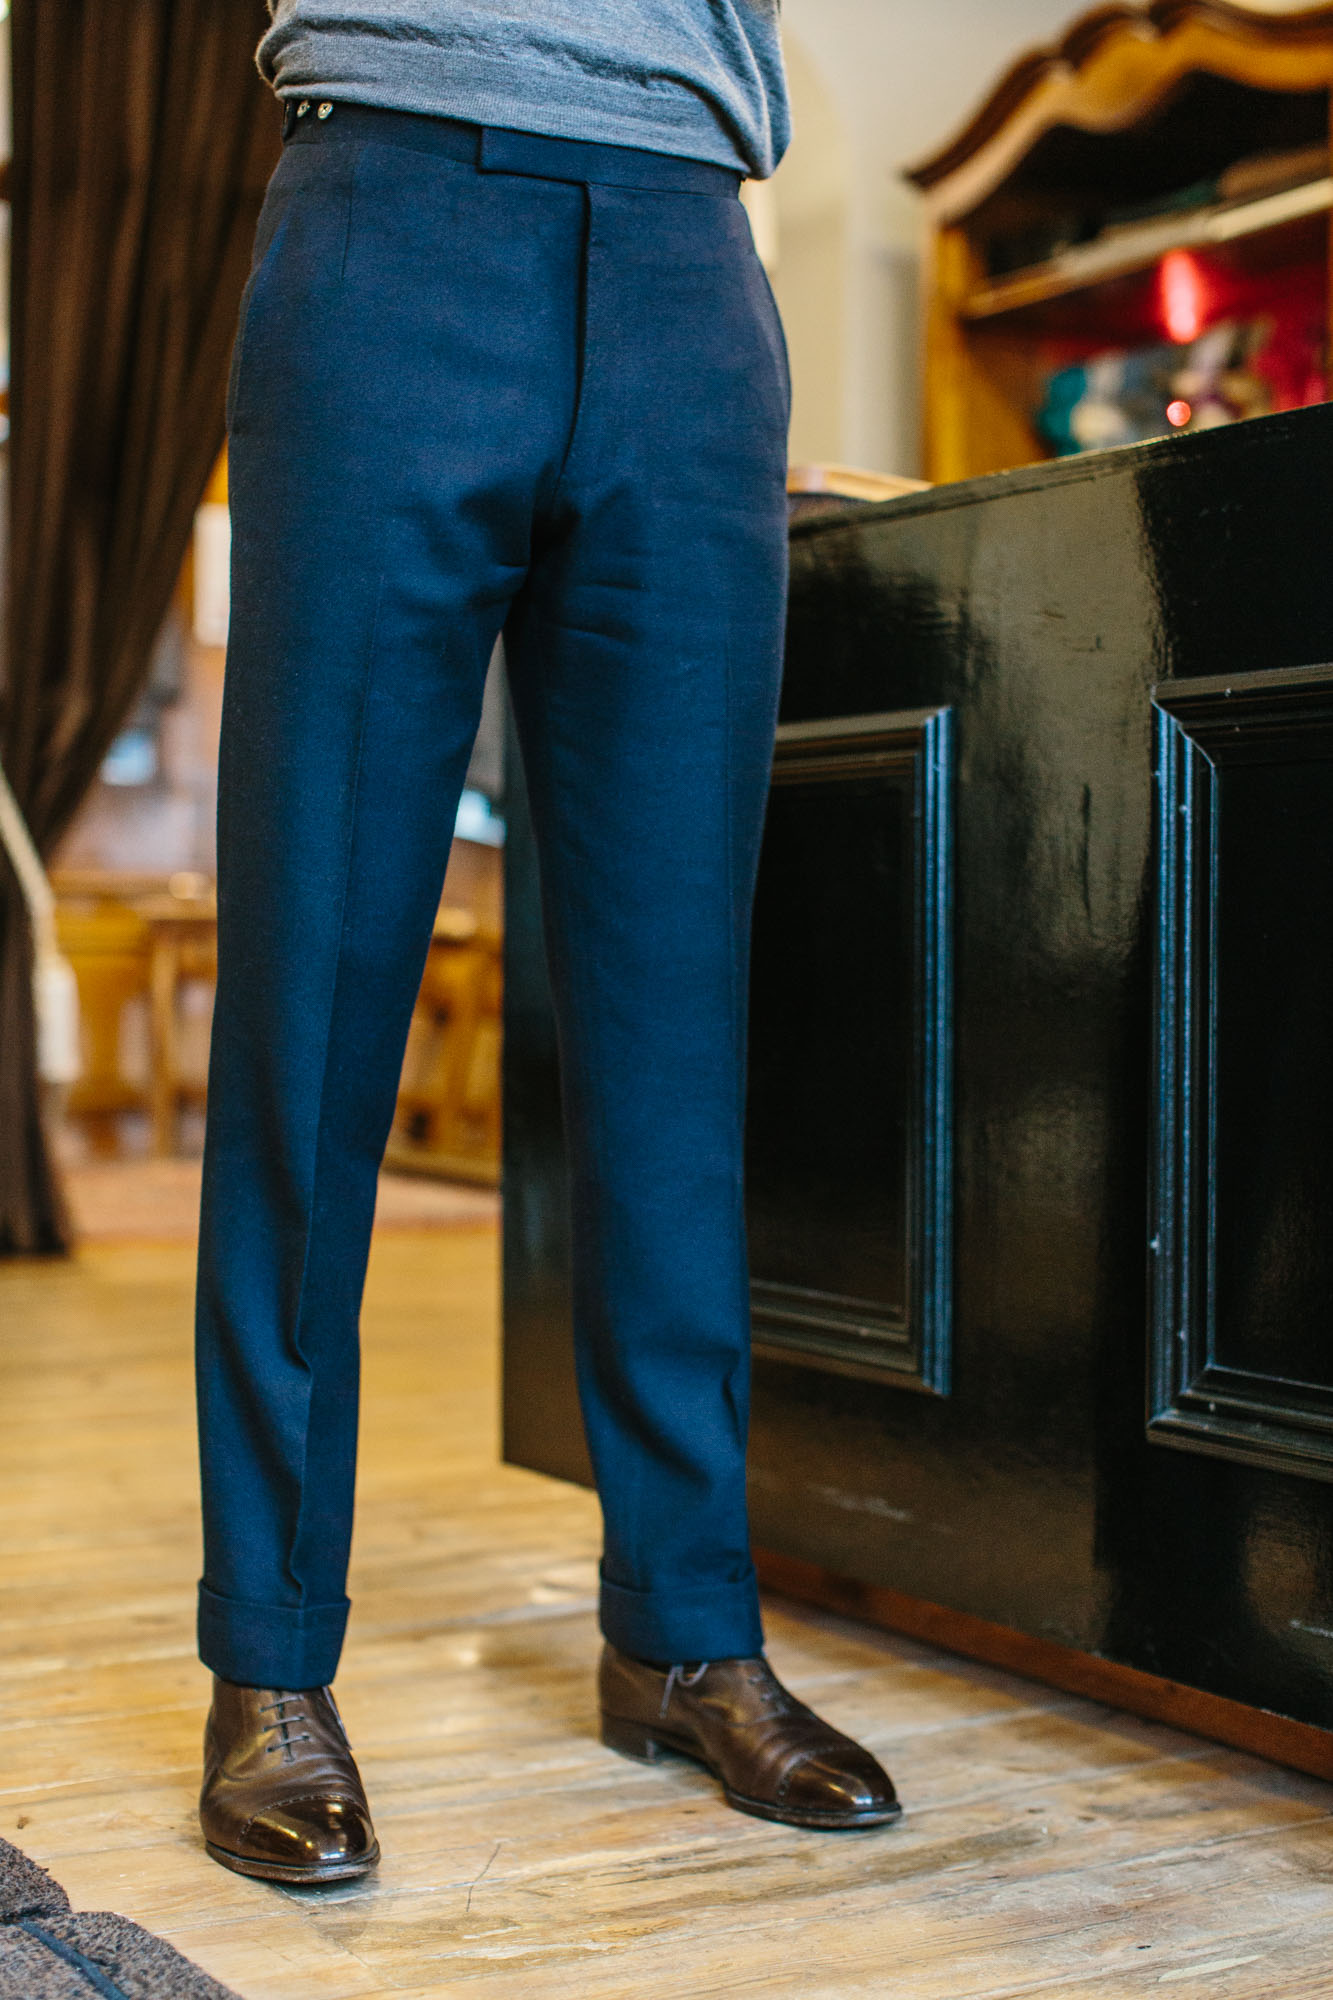 Suit Style 7 A guide to pleats on trousers  Permanent Style